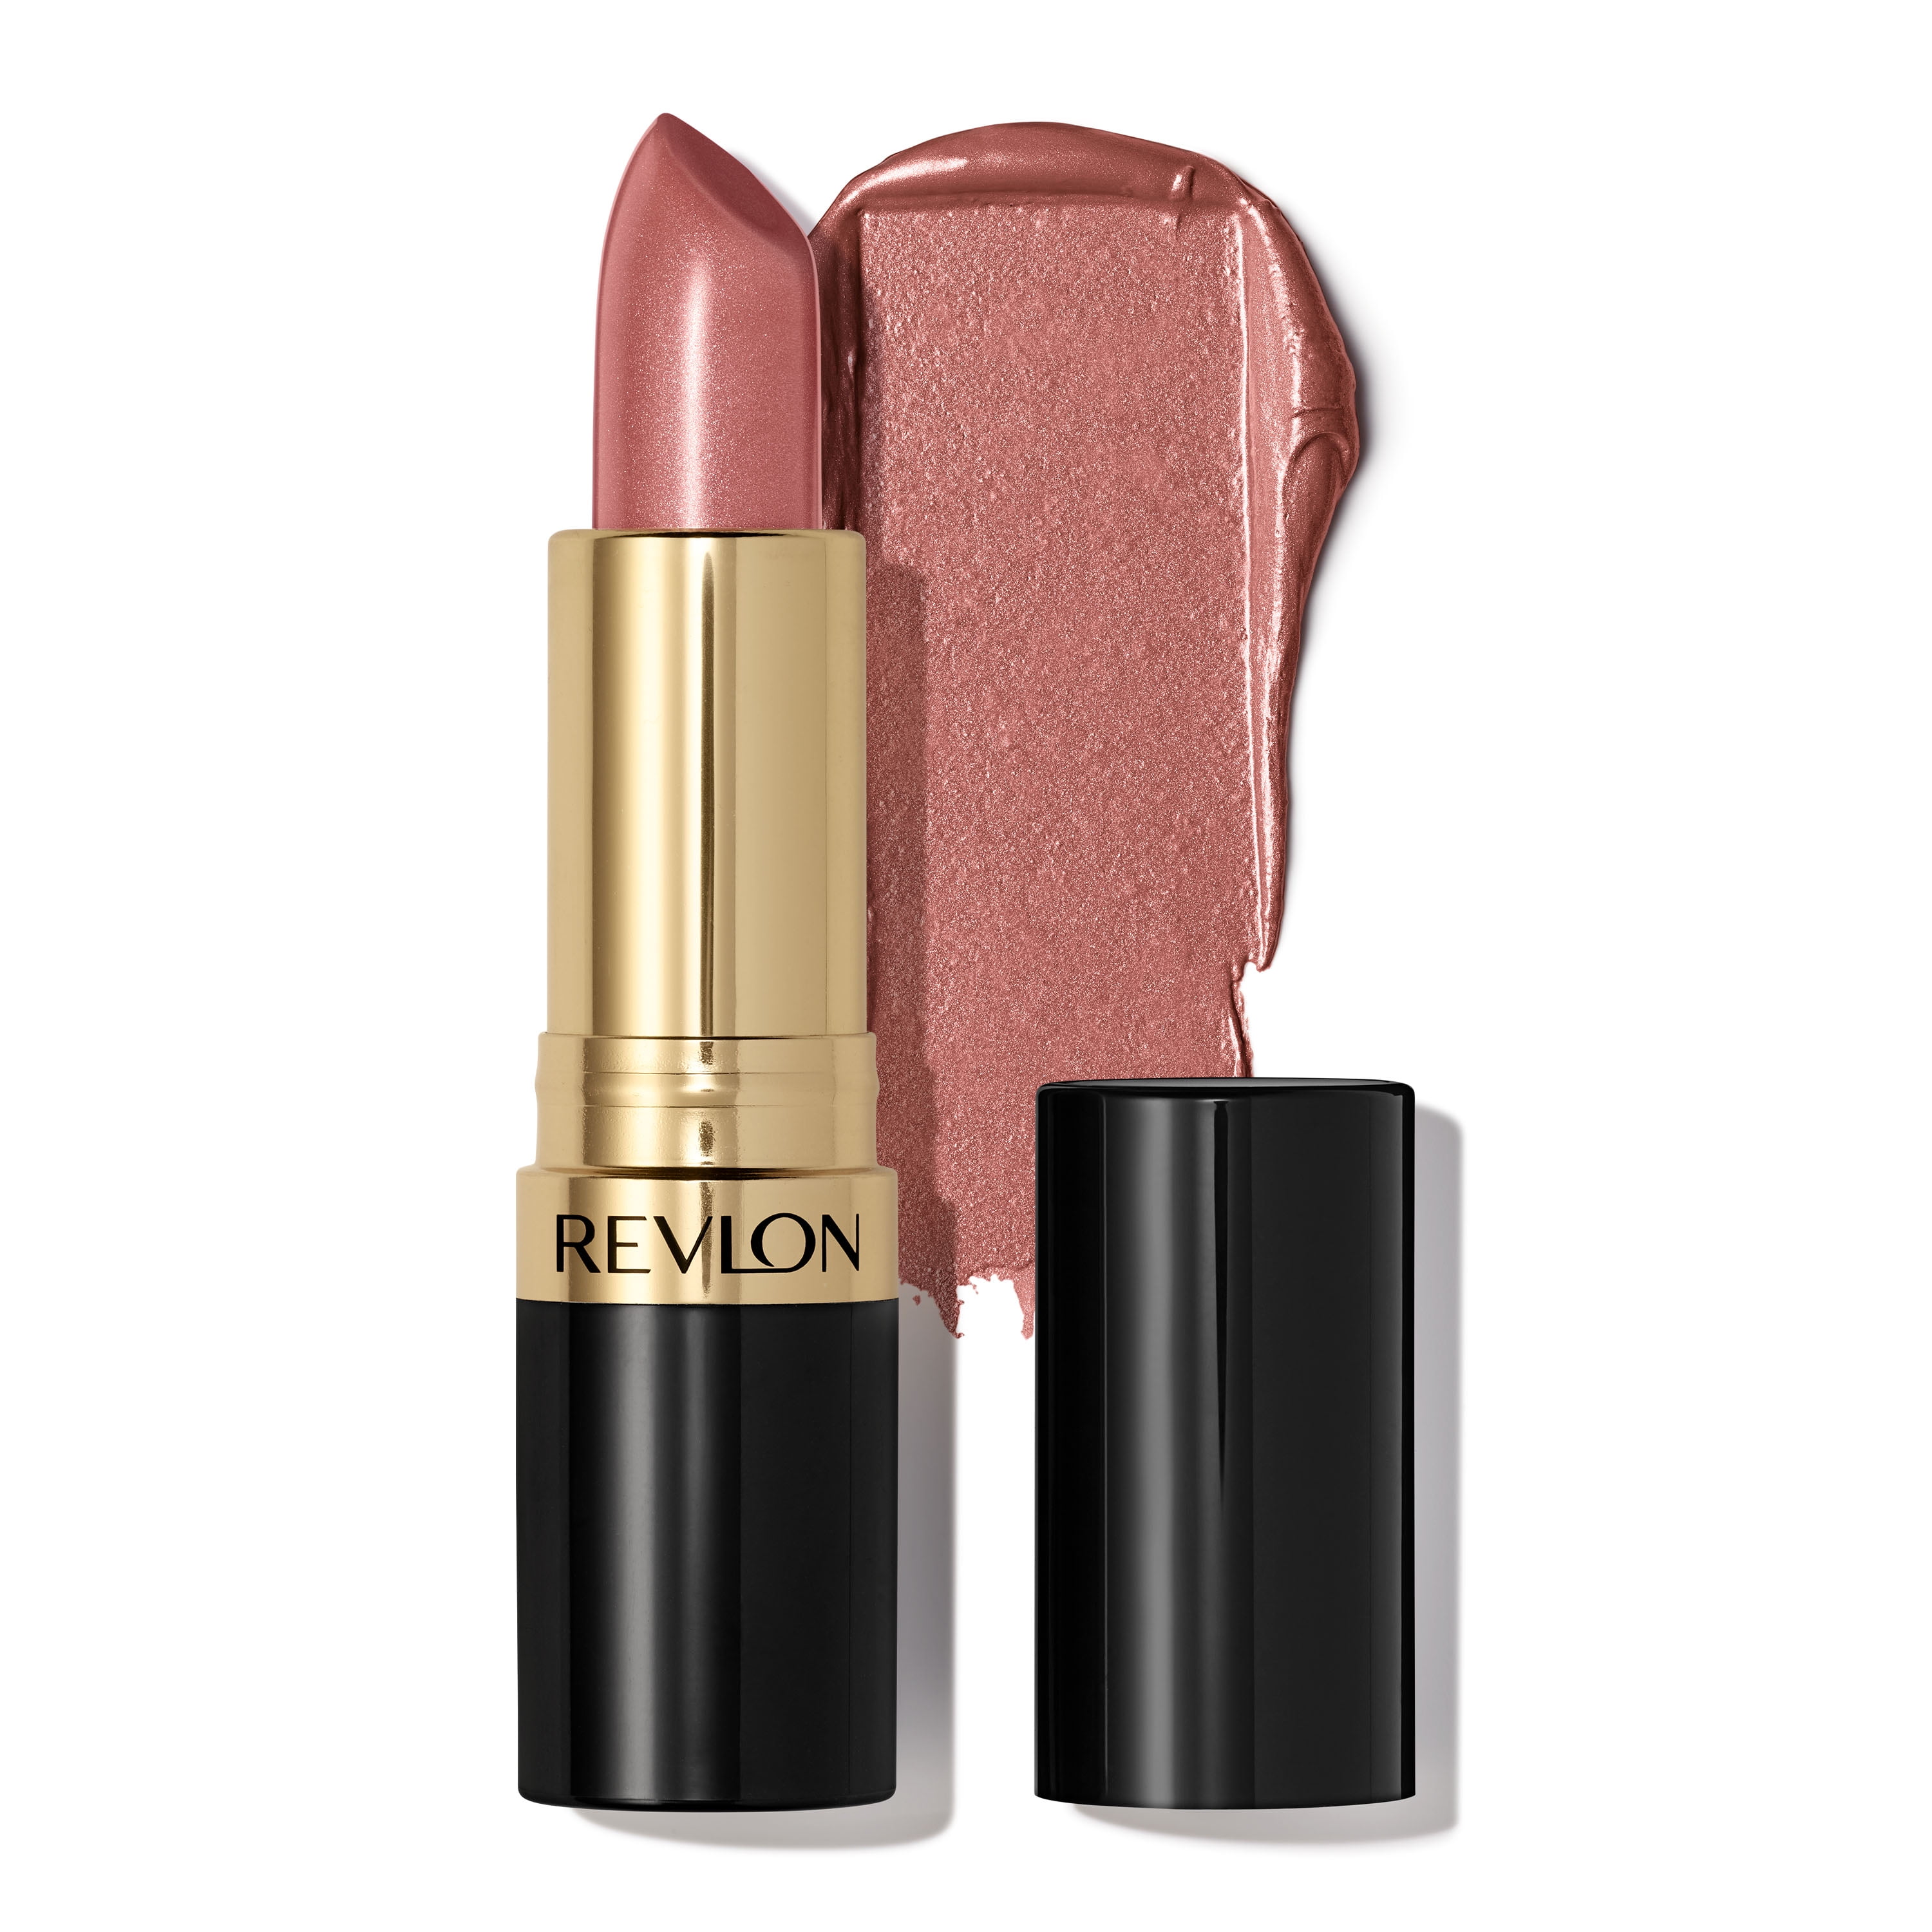 Revlon Super Lustrous Lipstick, Pearl Finish, High Impact Lipcolor with Moisturizing Creamy Formula, Infused with Vitamin E and Avocado Oil, 205 Champagne On Ice, 0.15 oz